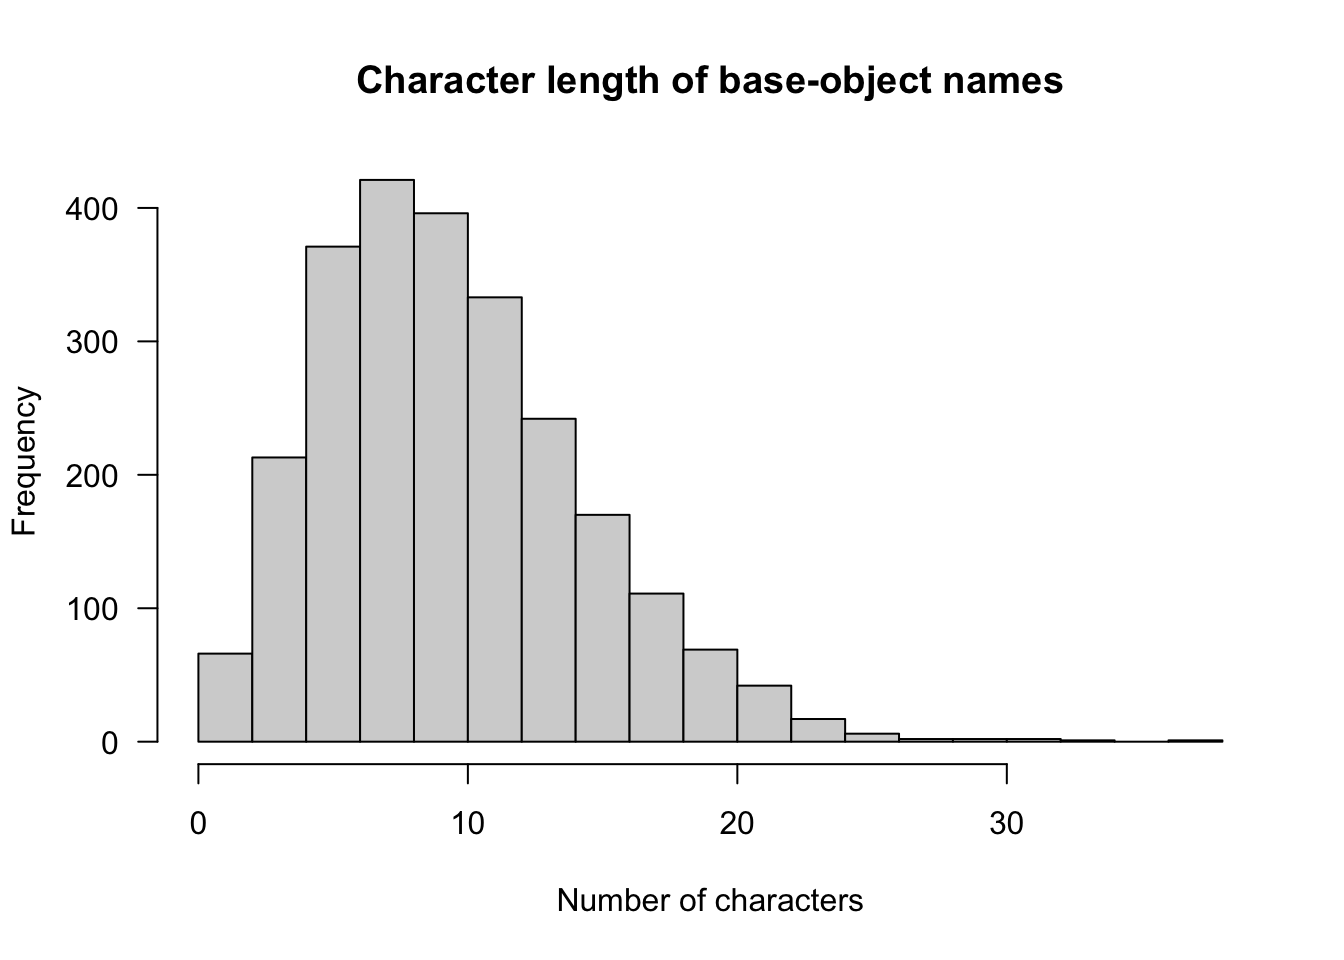 Histogram of character lengths for base object names. It's fairly normal around a bin of 6 to 8 characters, which has a peak frequency of over 400, plus there's a tail stretching out to over 30 characters.